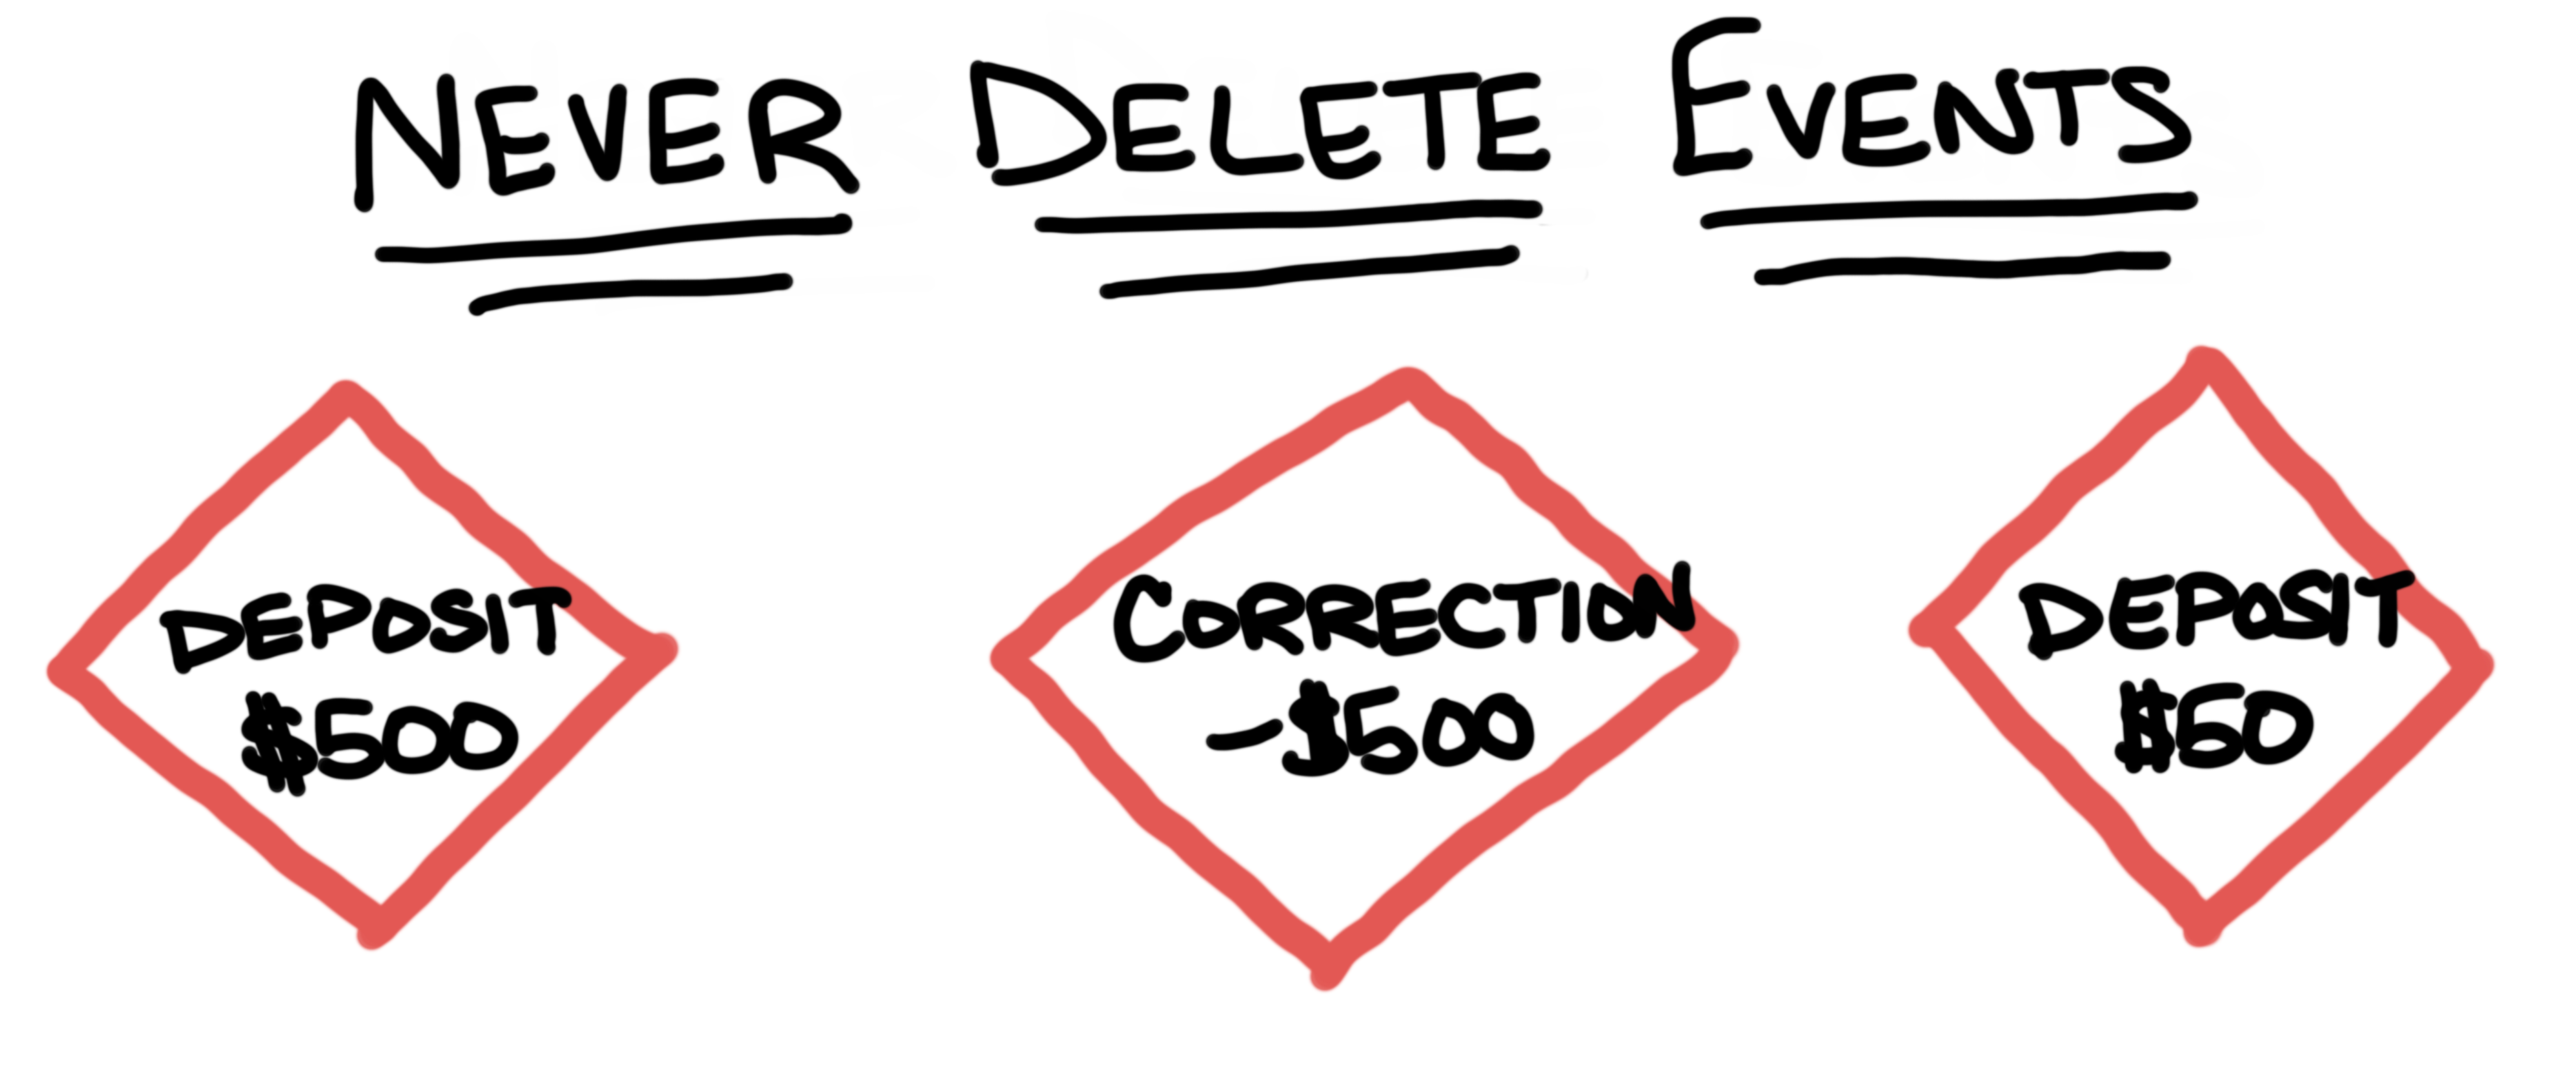 3 symbols representing events of a deposit, a correction, and a deposit